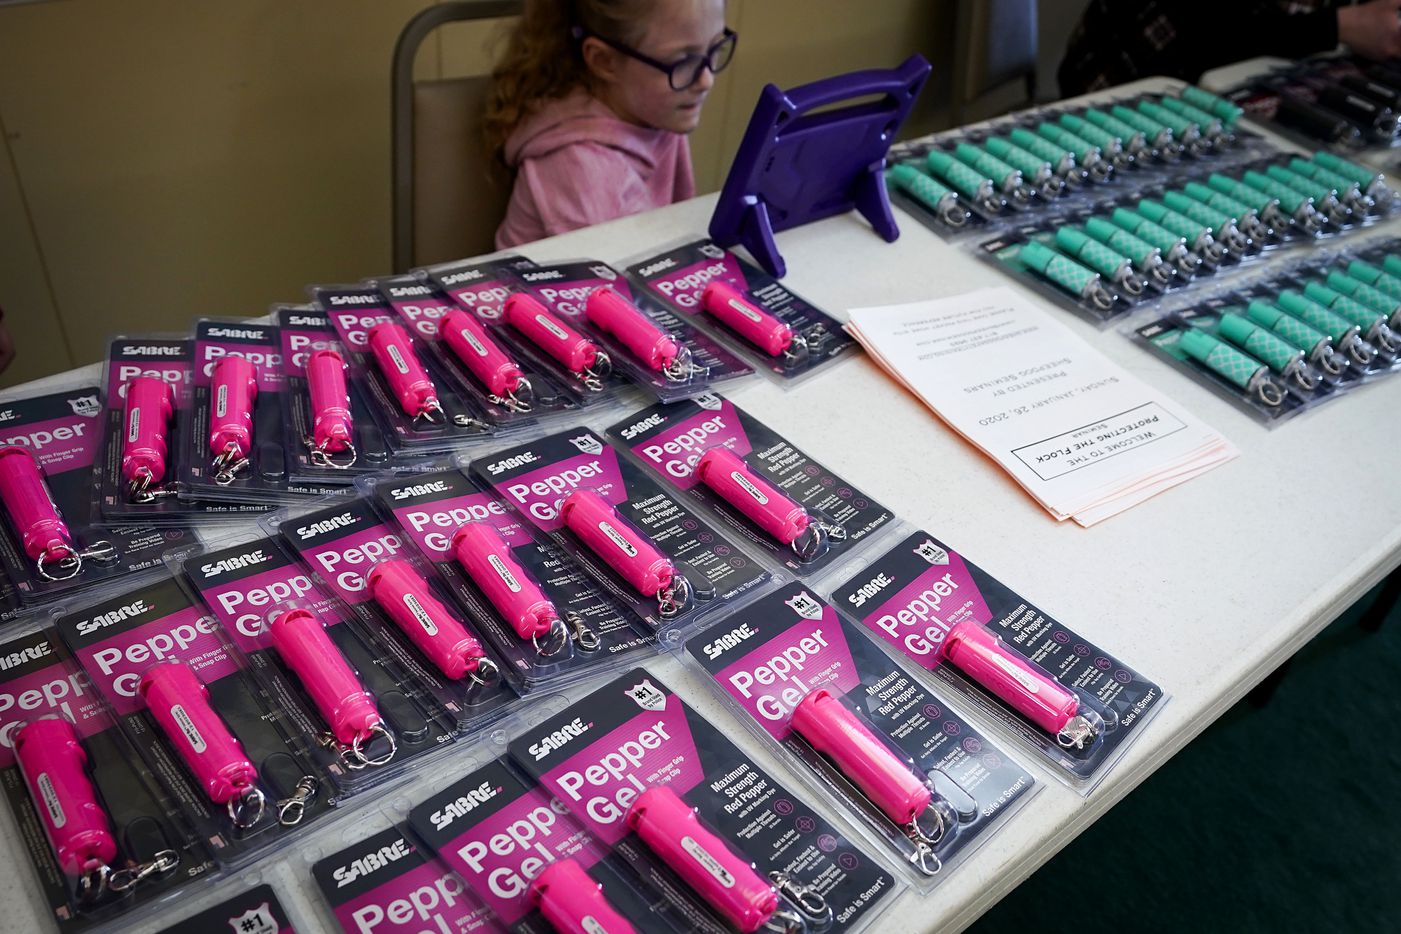 Packages of pepper spray are displayed during a  church safety seminar at North Pointe...